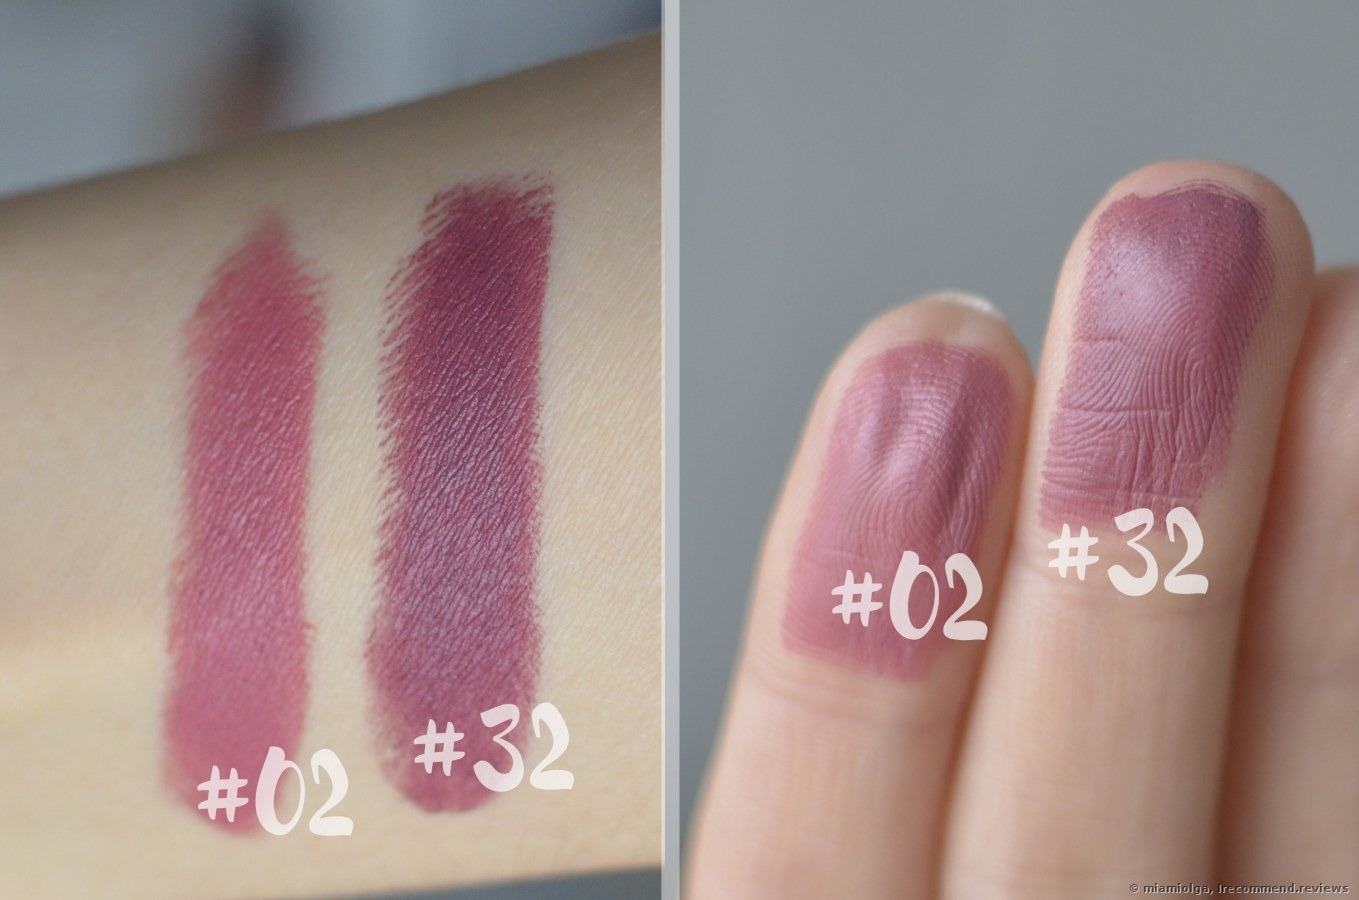 Golden Rose Velvet Matte Lipstick Not The Jewel In The Crown But Still Quite A Worthy Lipstick Swatches Of The Shades 02 And 32 Consumer Reviews